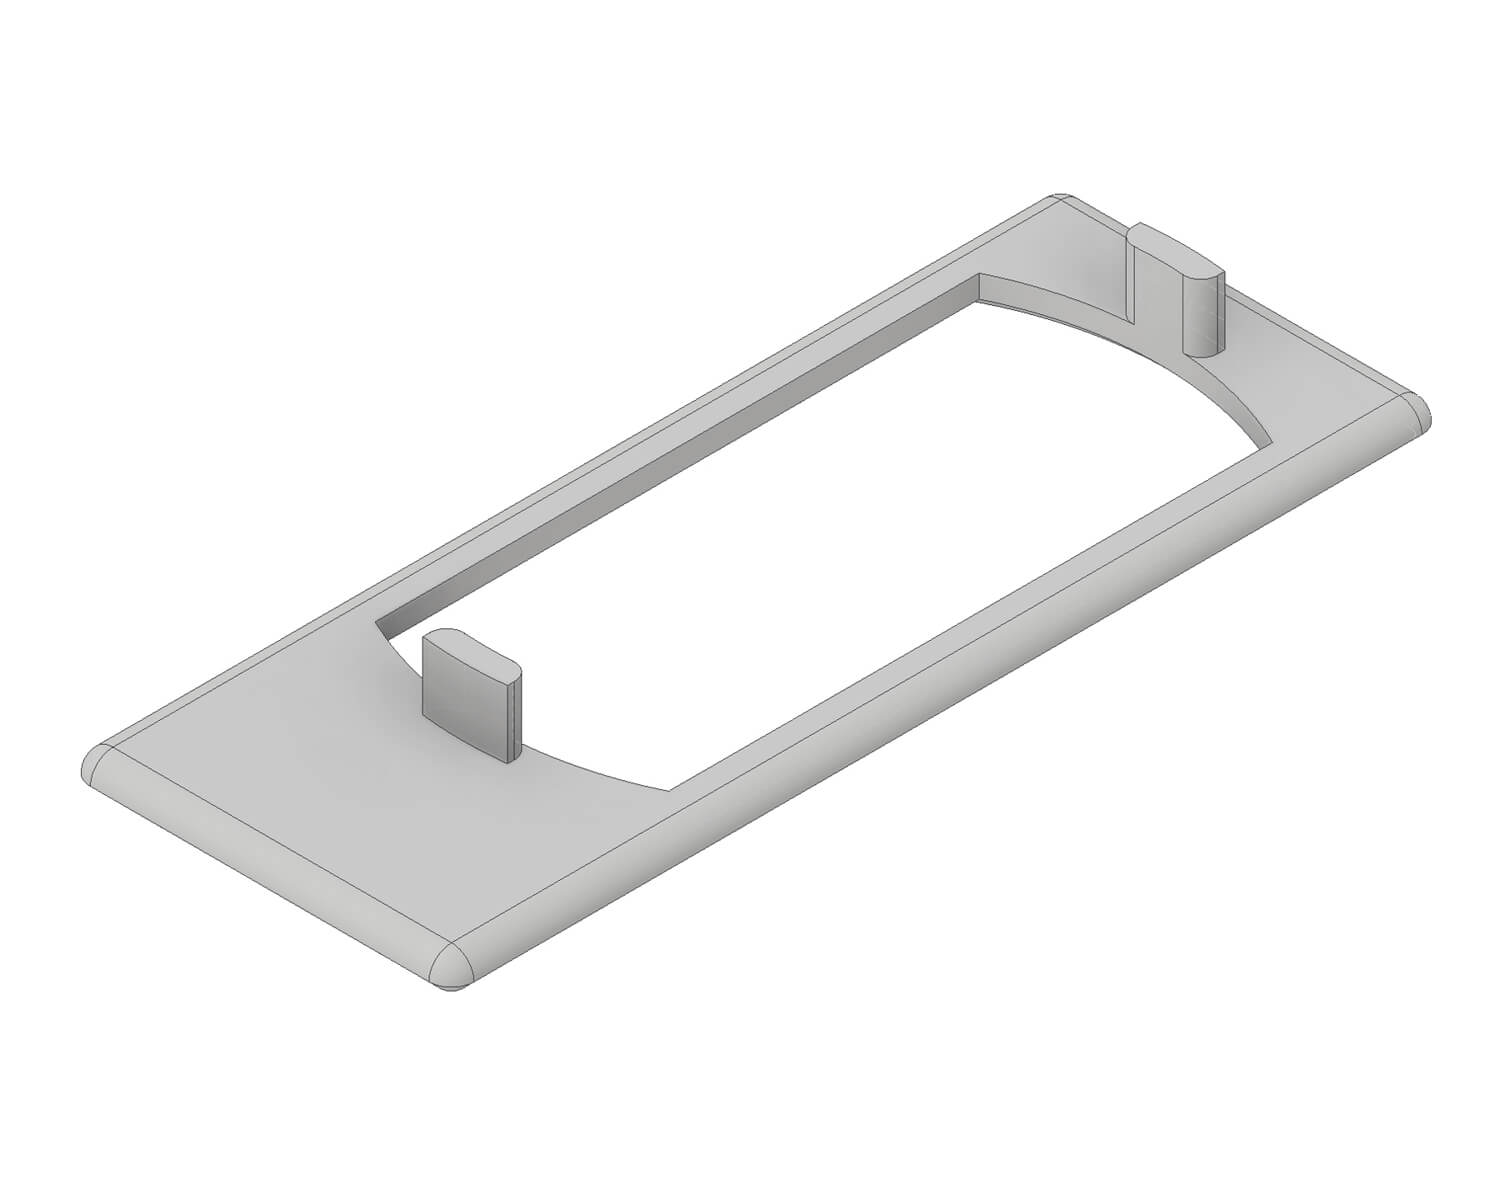 Pix Panorama - CAD model of the top of the Filter holder